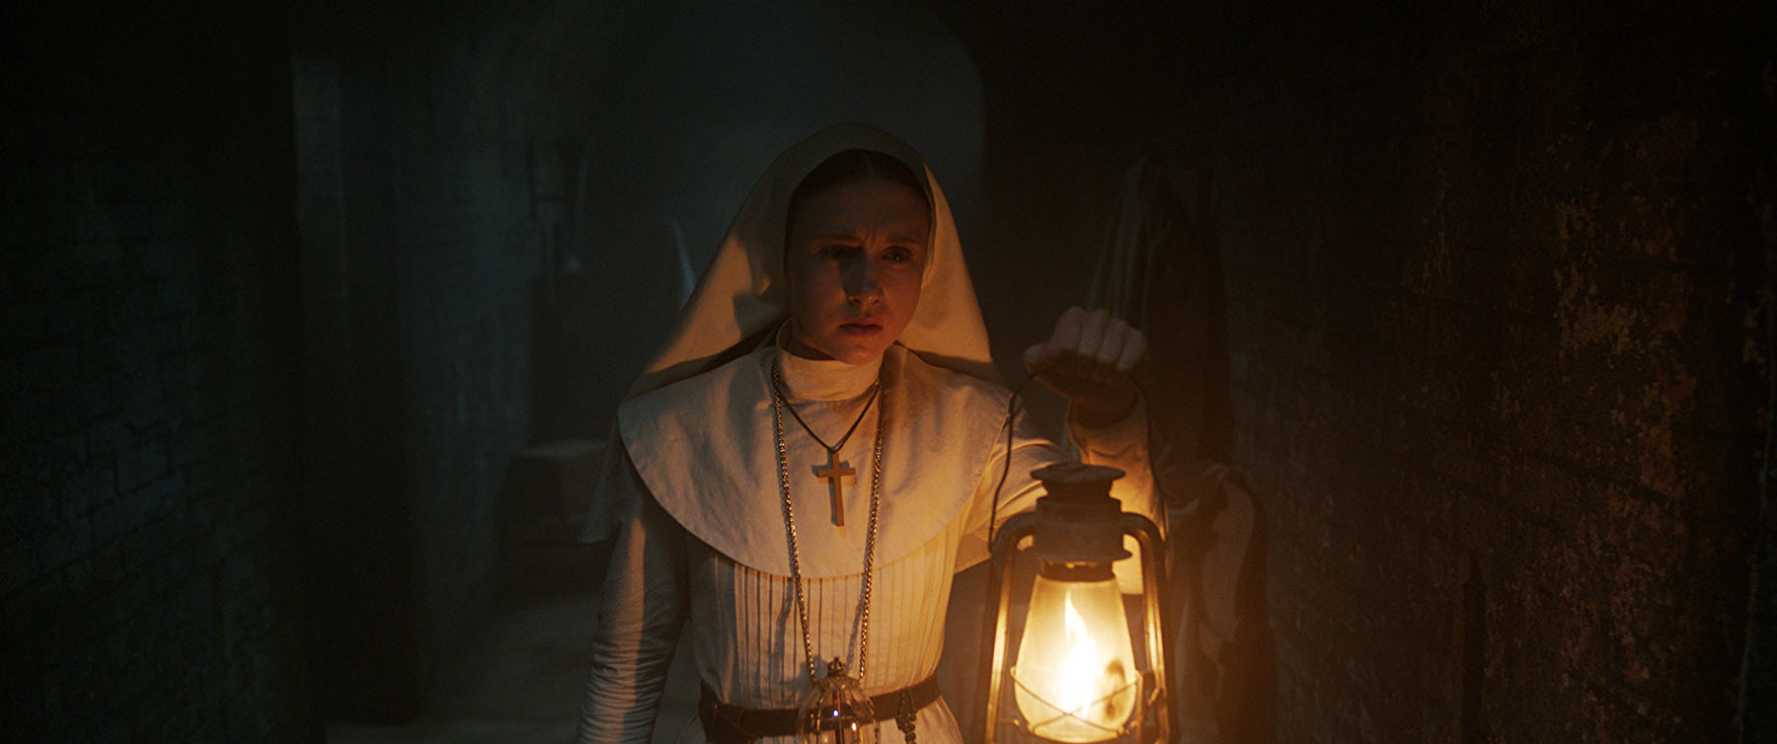 This is a still image from The Nun.